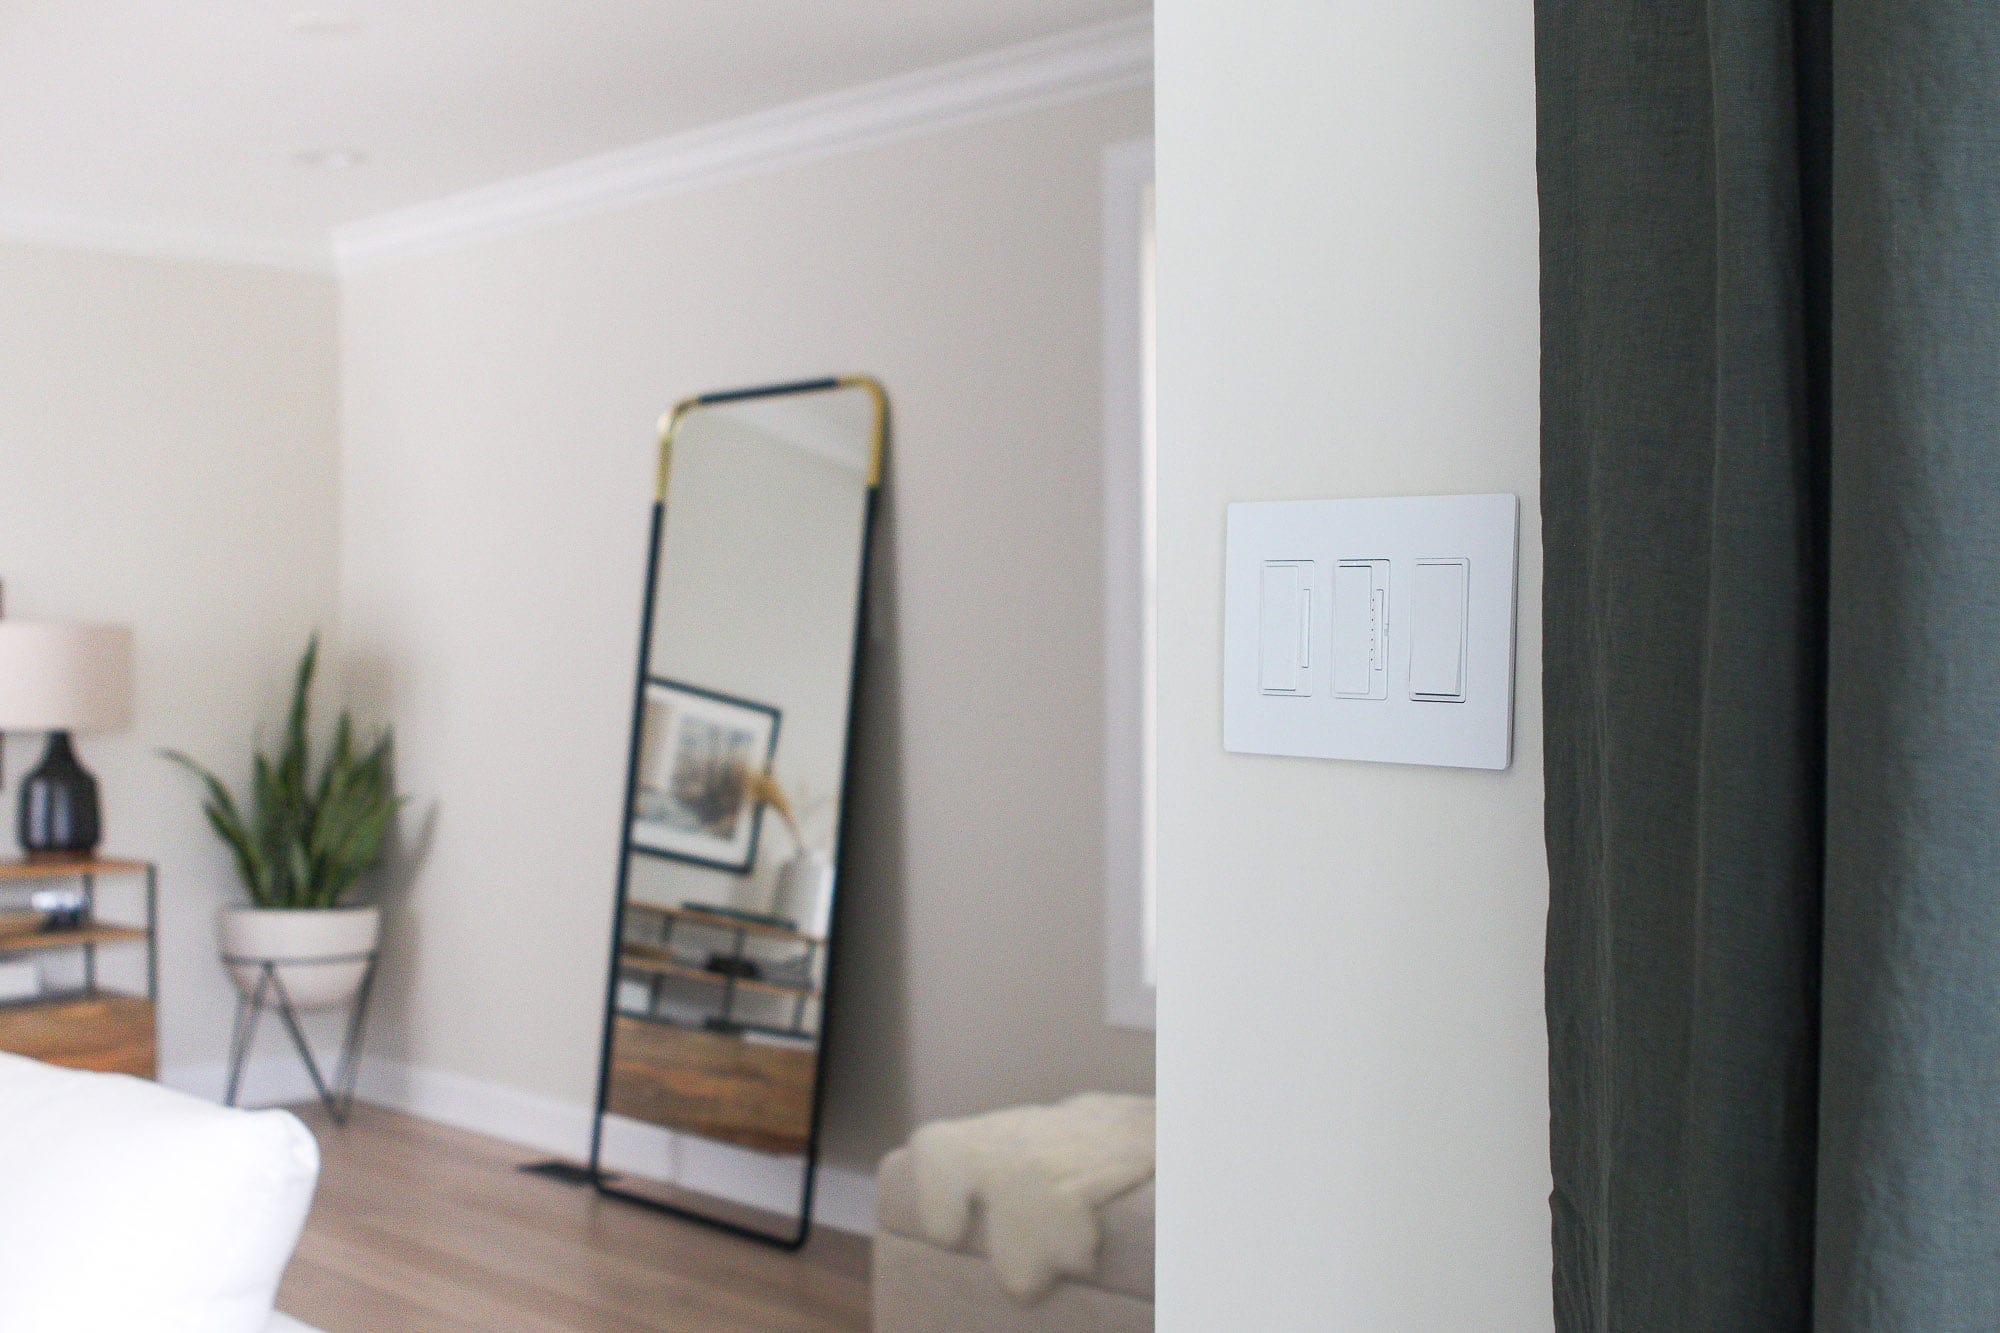 Smart dimmer switches from Legrand